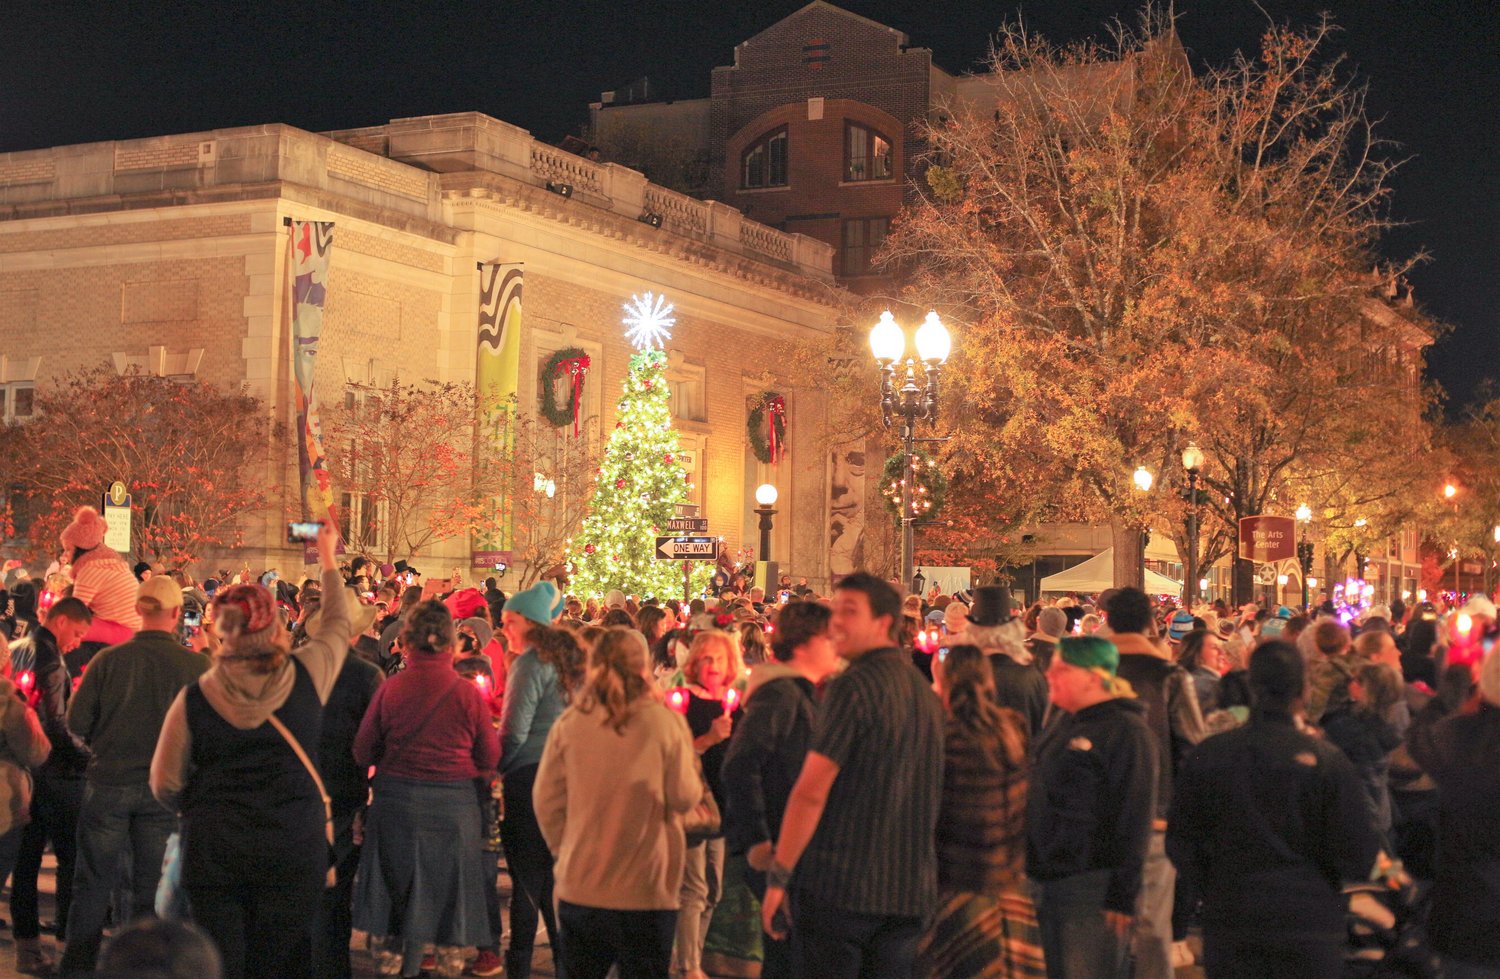 The Downtown Alliance is seeking a permit to hold A Dickens Holiday downtown on the day after Thanksgiving.